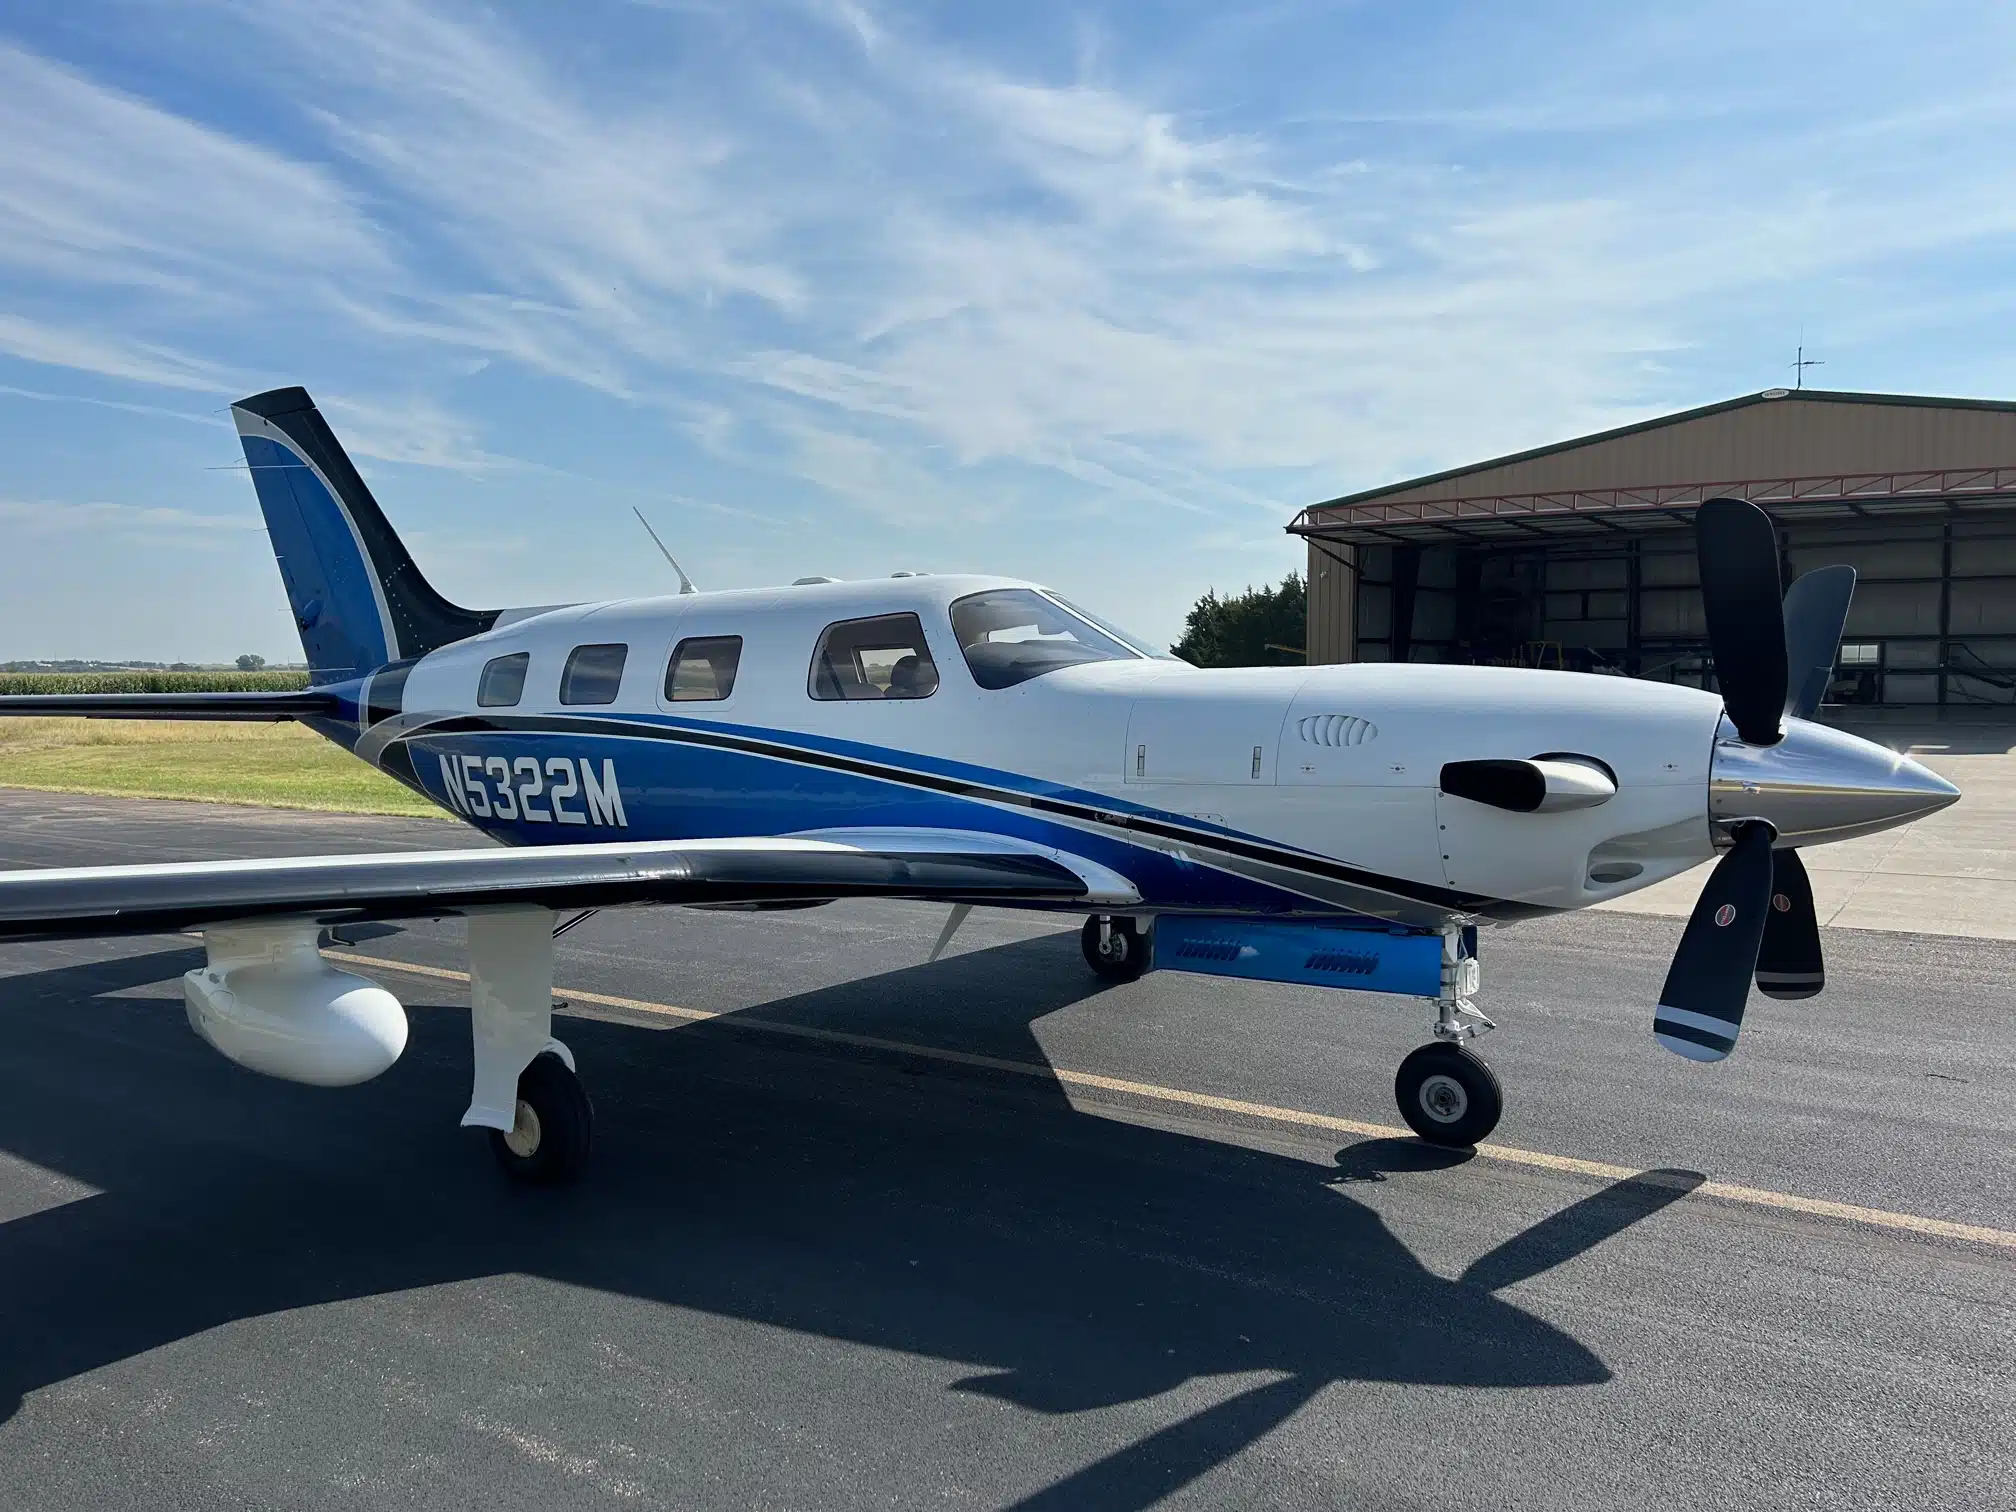 2001 Piper PA46 500TP Meridian Turboprop Aircraft For Sale From Lone Mountain Aircraft On AvPay aircraft exterior front right